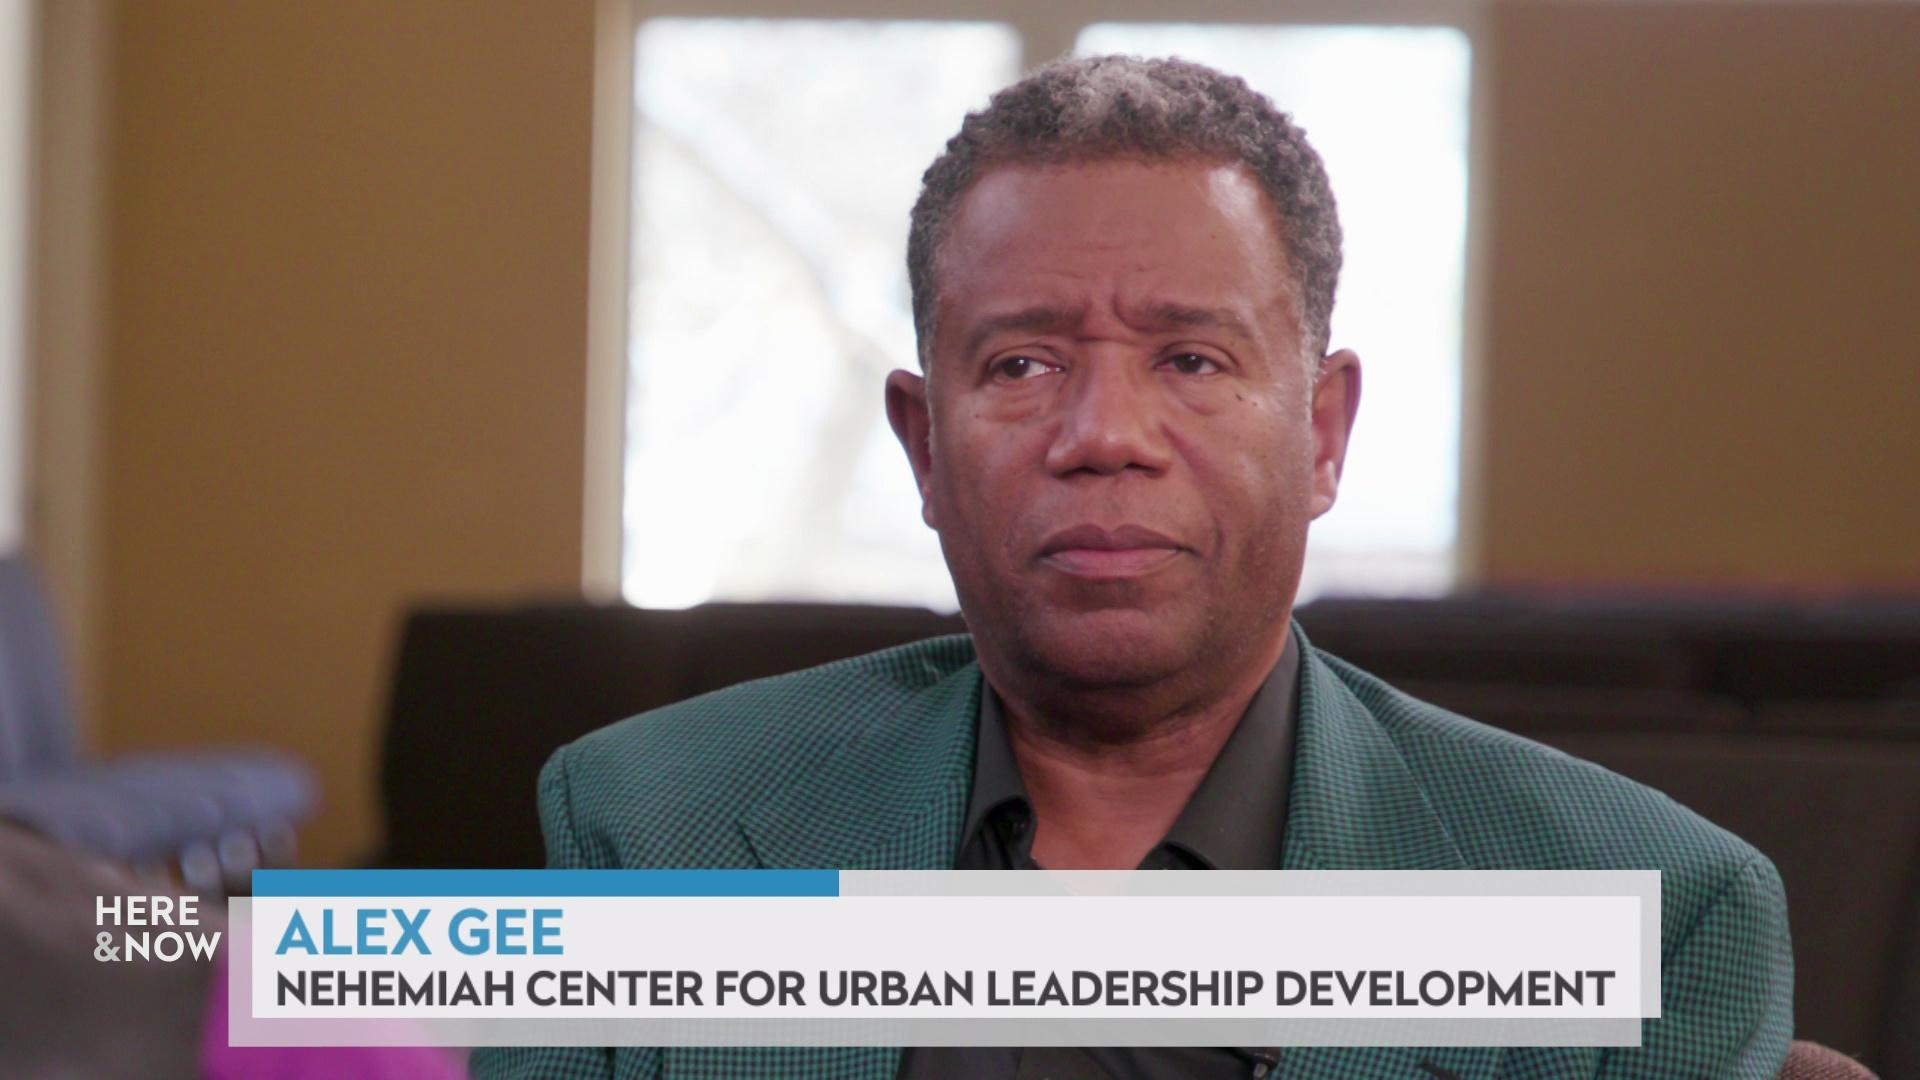 A still image shows Dr. Alex Gee seated in front of a tan wall and window with a graphic at bottom reading 'Alex Gee' and 'Nehemiah Center for Urban Leadership Development.'